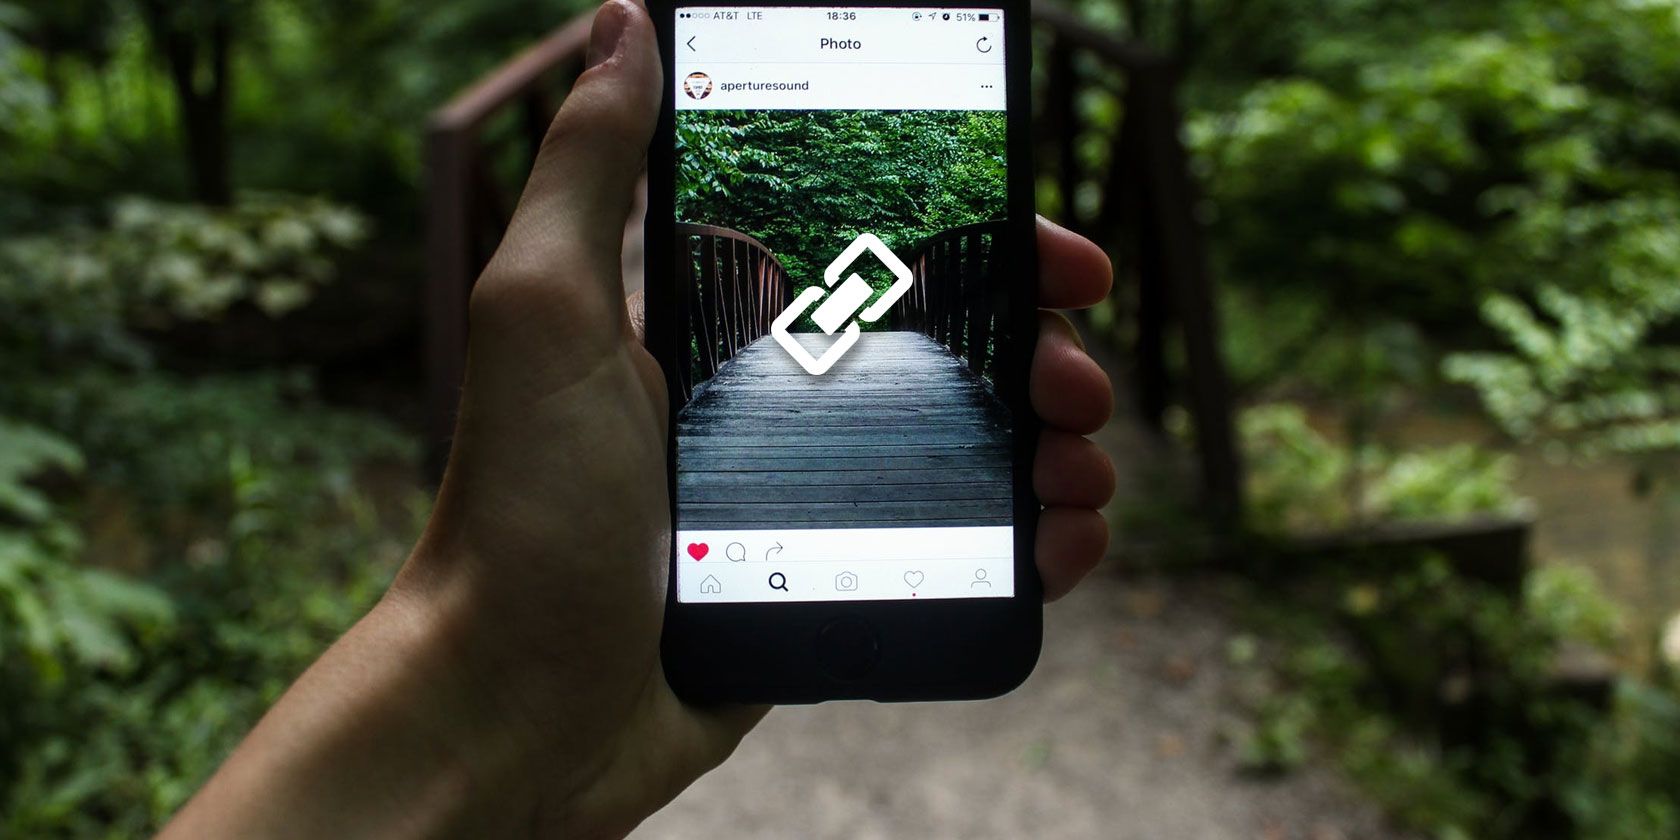 How to Add Links to Your Instagram Posts 7 Ways